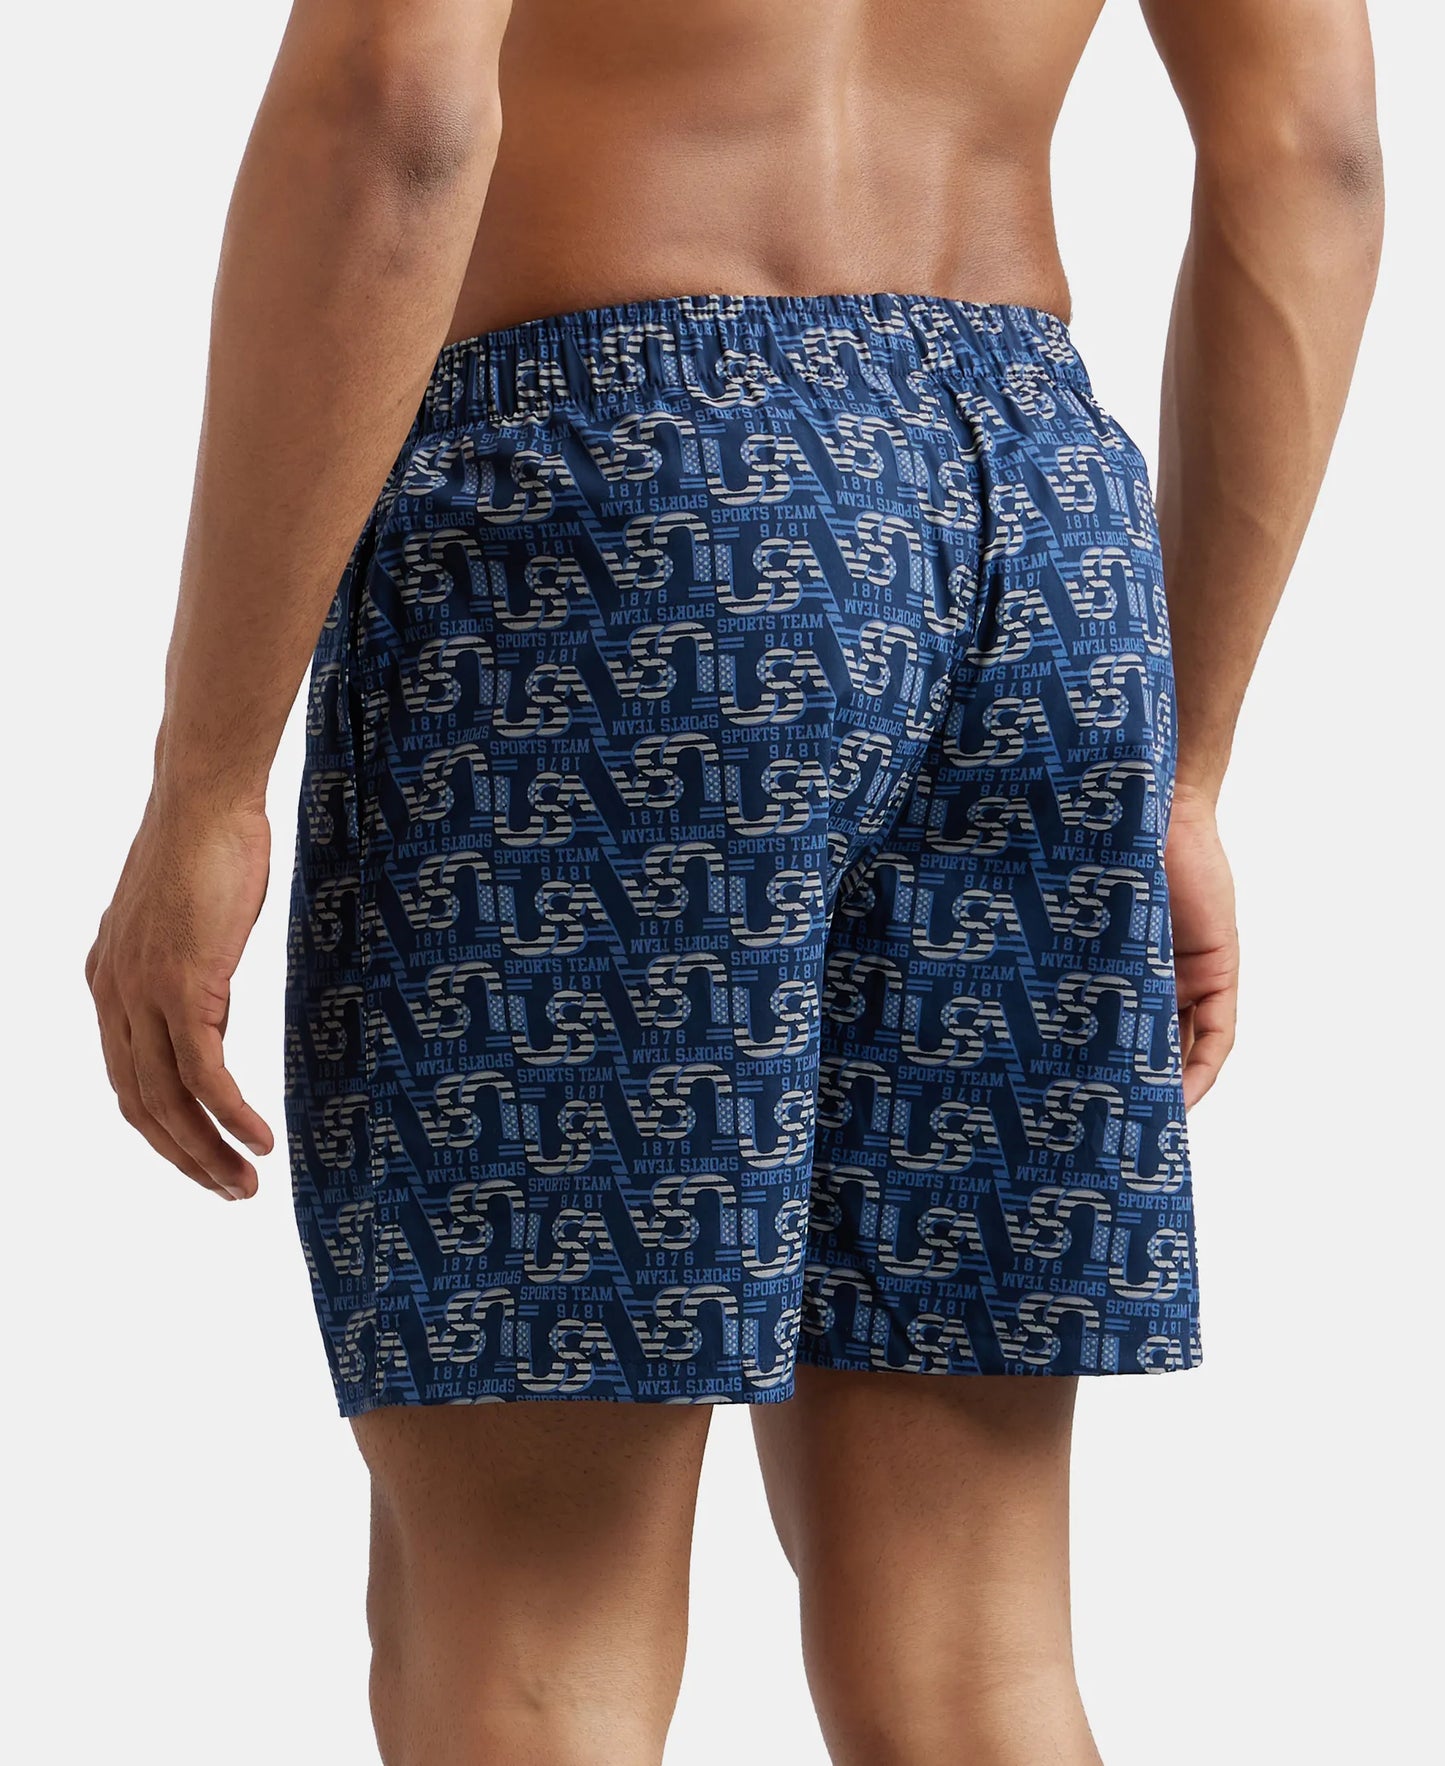 Super Combed Mercerized Cotton Woven Printed Boxer Shorts with Side Pocket - Navy-3